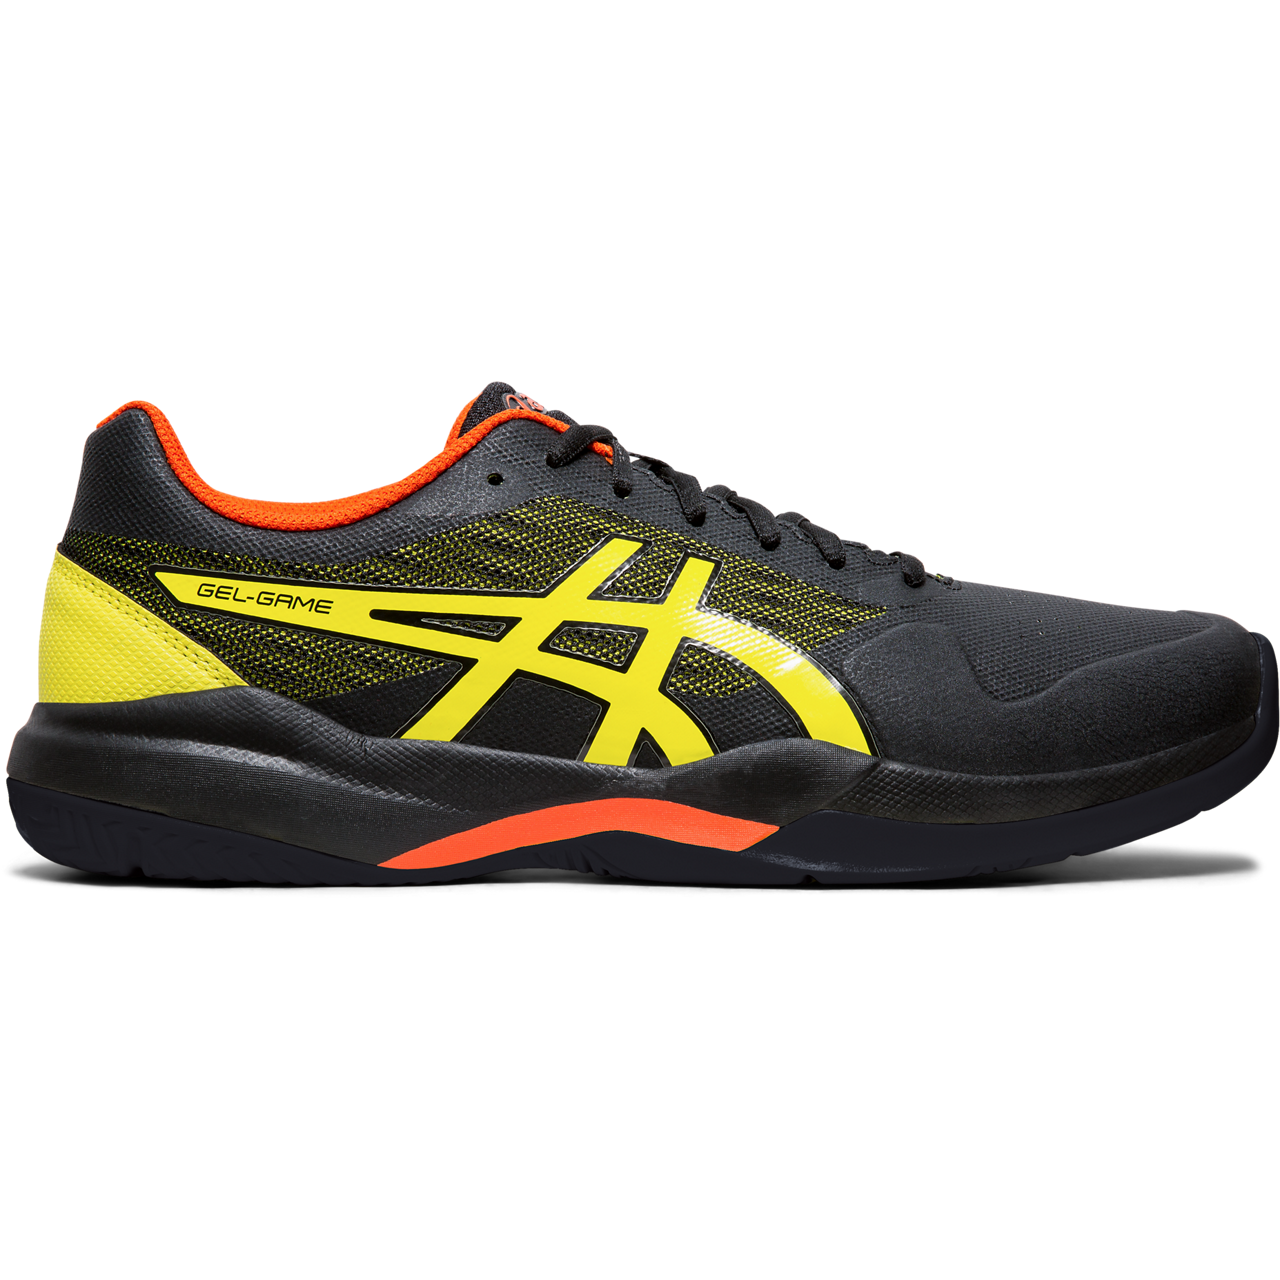 black and yellow mens tennis shoes